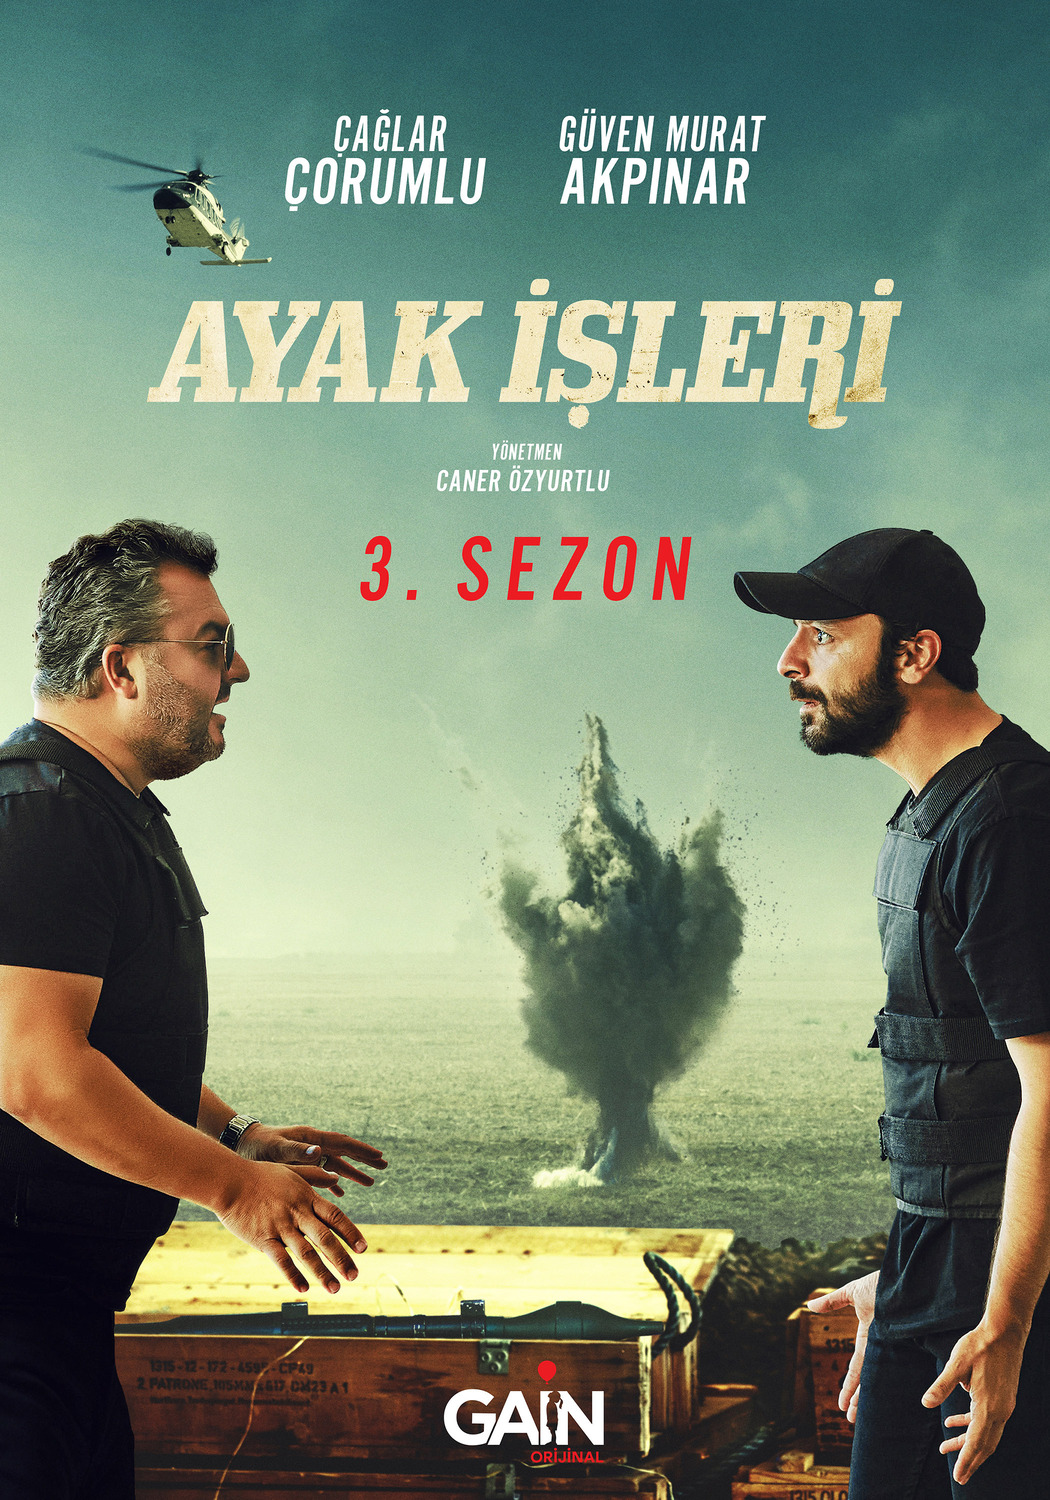 Extra Large TV Poster Image for Ayak Isleri (#7 of 8)